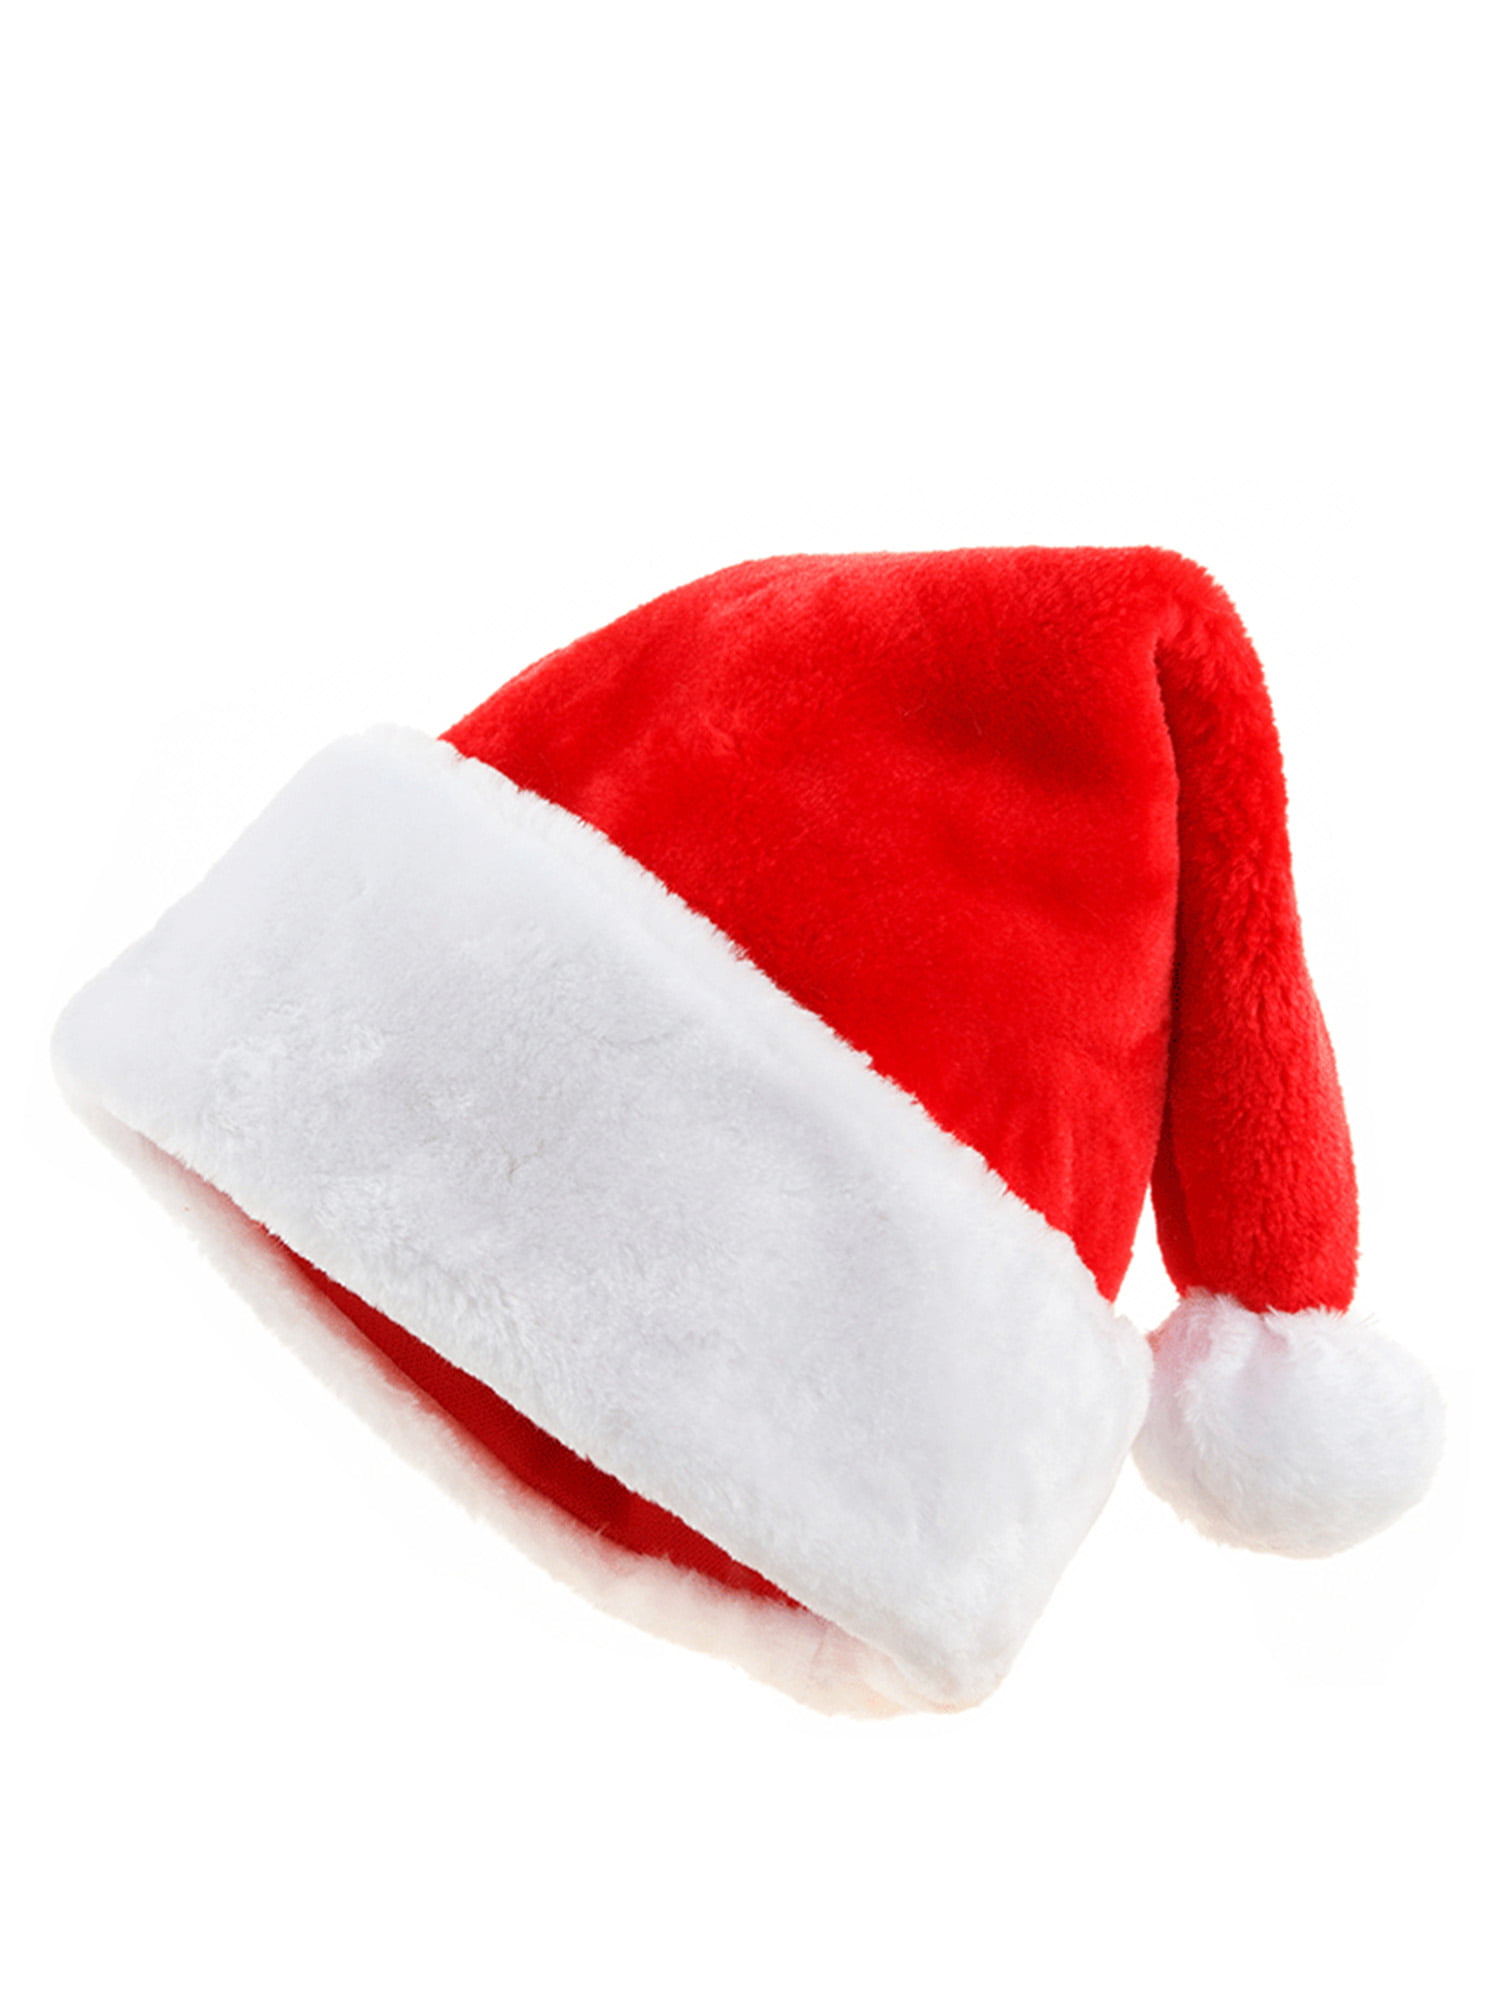 Father Christmas Festive Headwear Office Family Xmas Parties Non-Woven Felt Hats Pack of 6 Red Santa Hats with Bobble